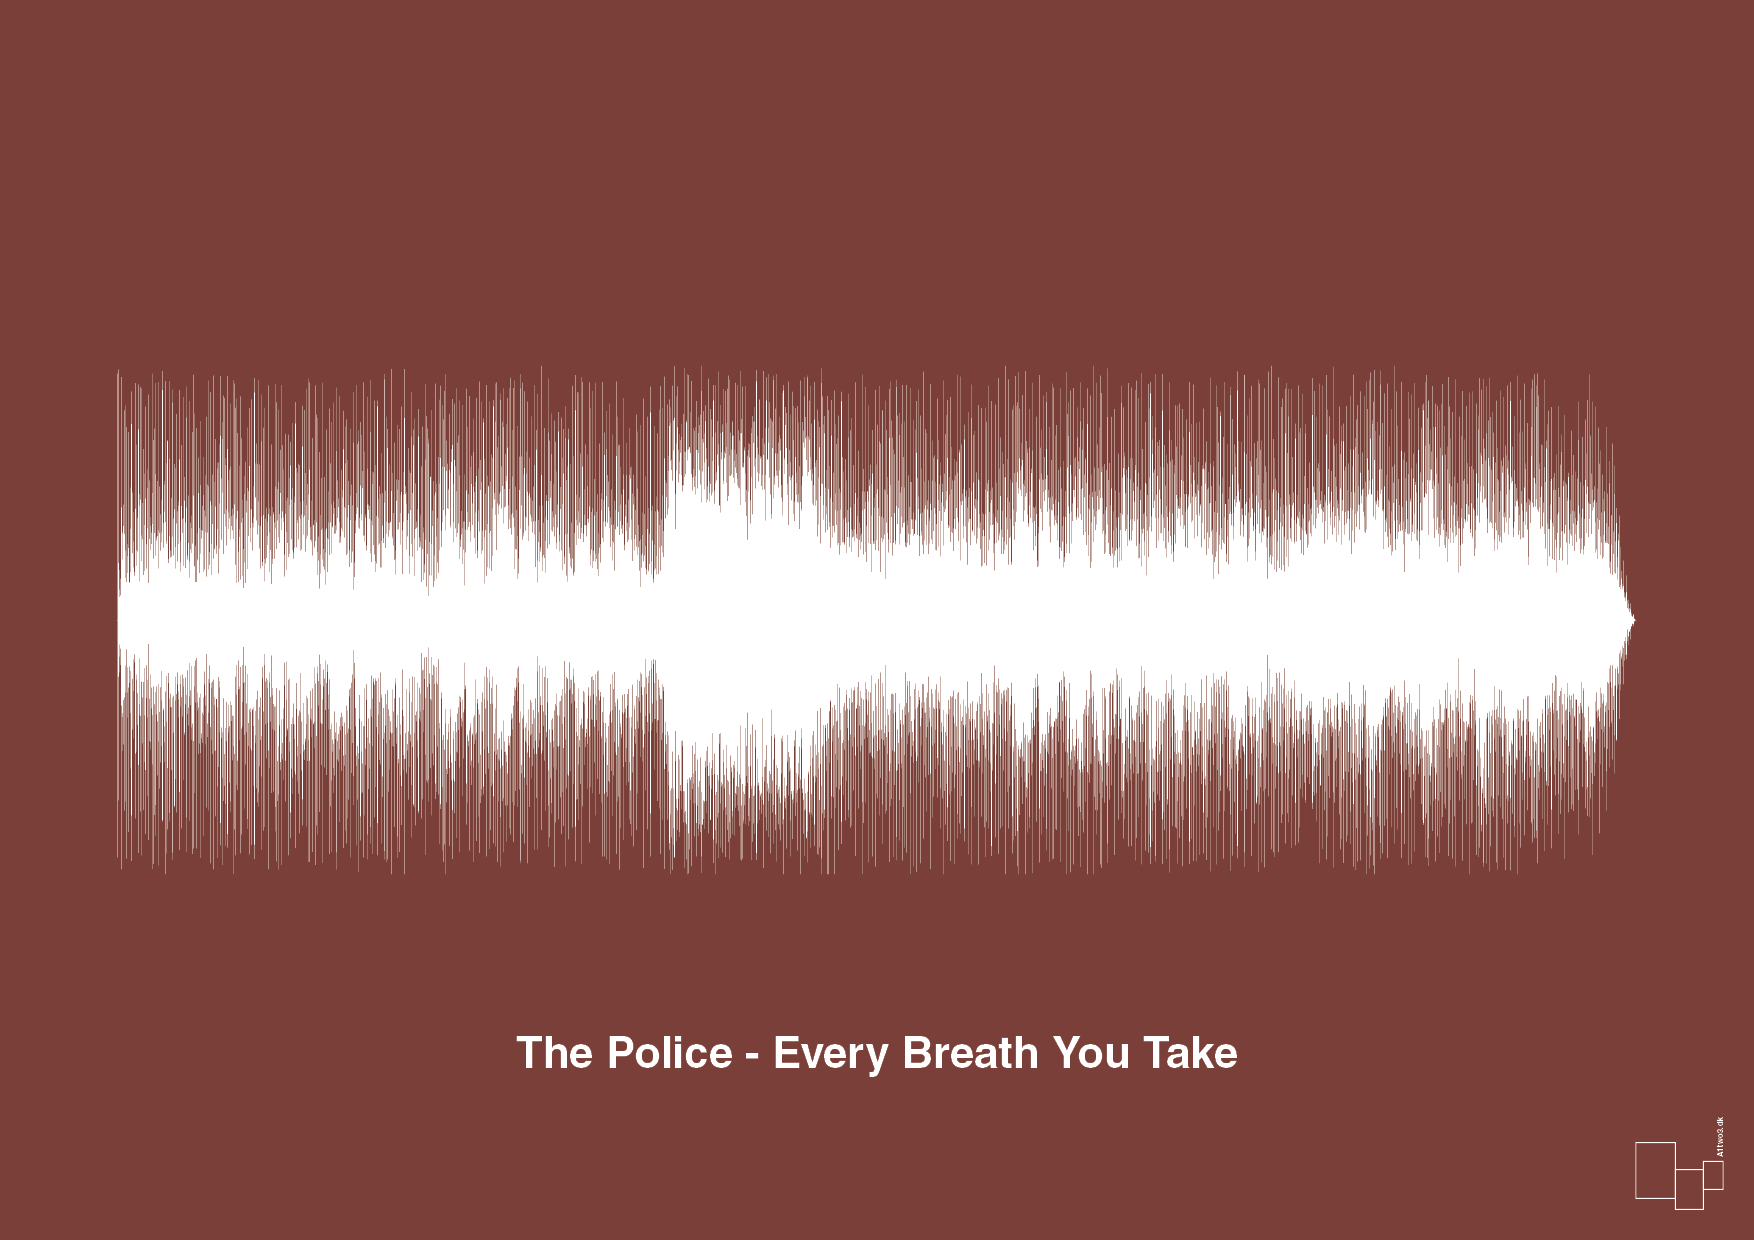 the police - every breath you take - Plakat med Musik i Red Pepper